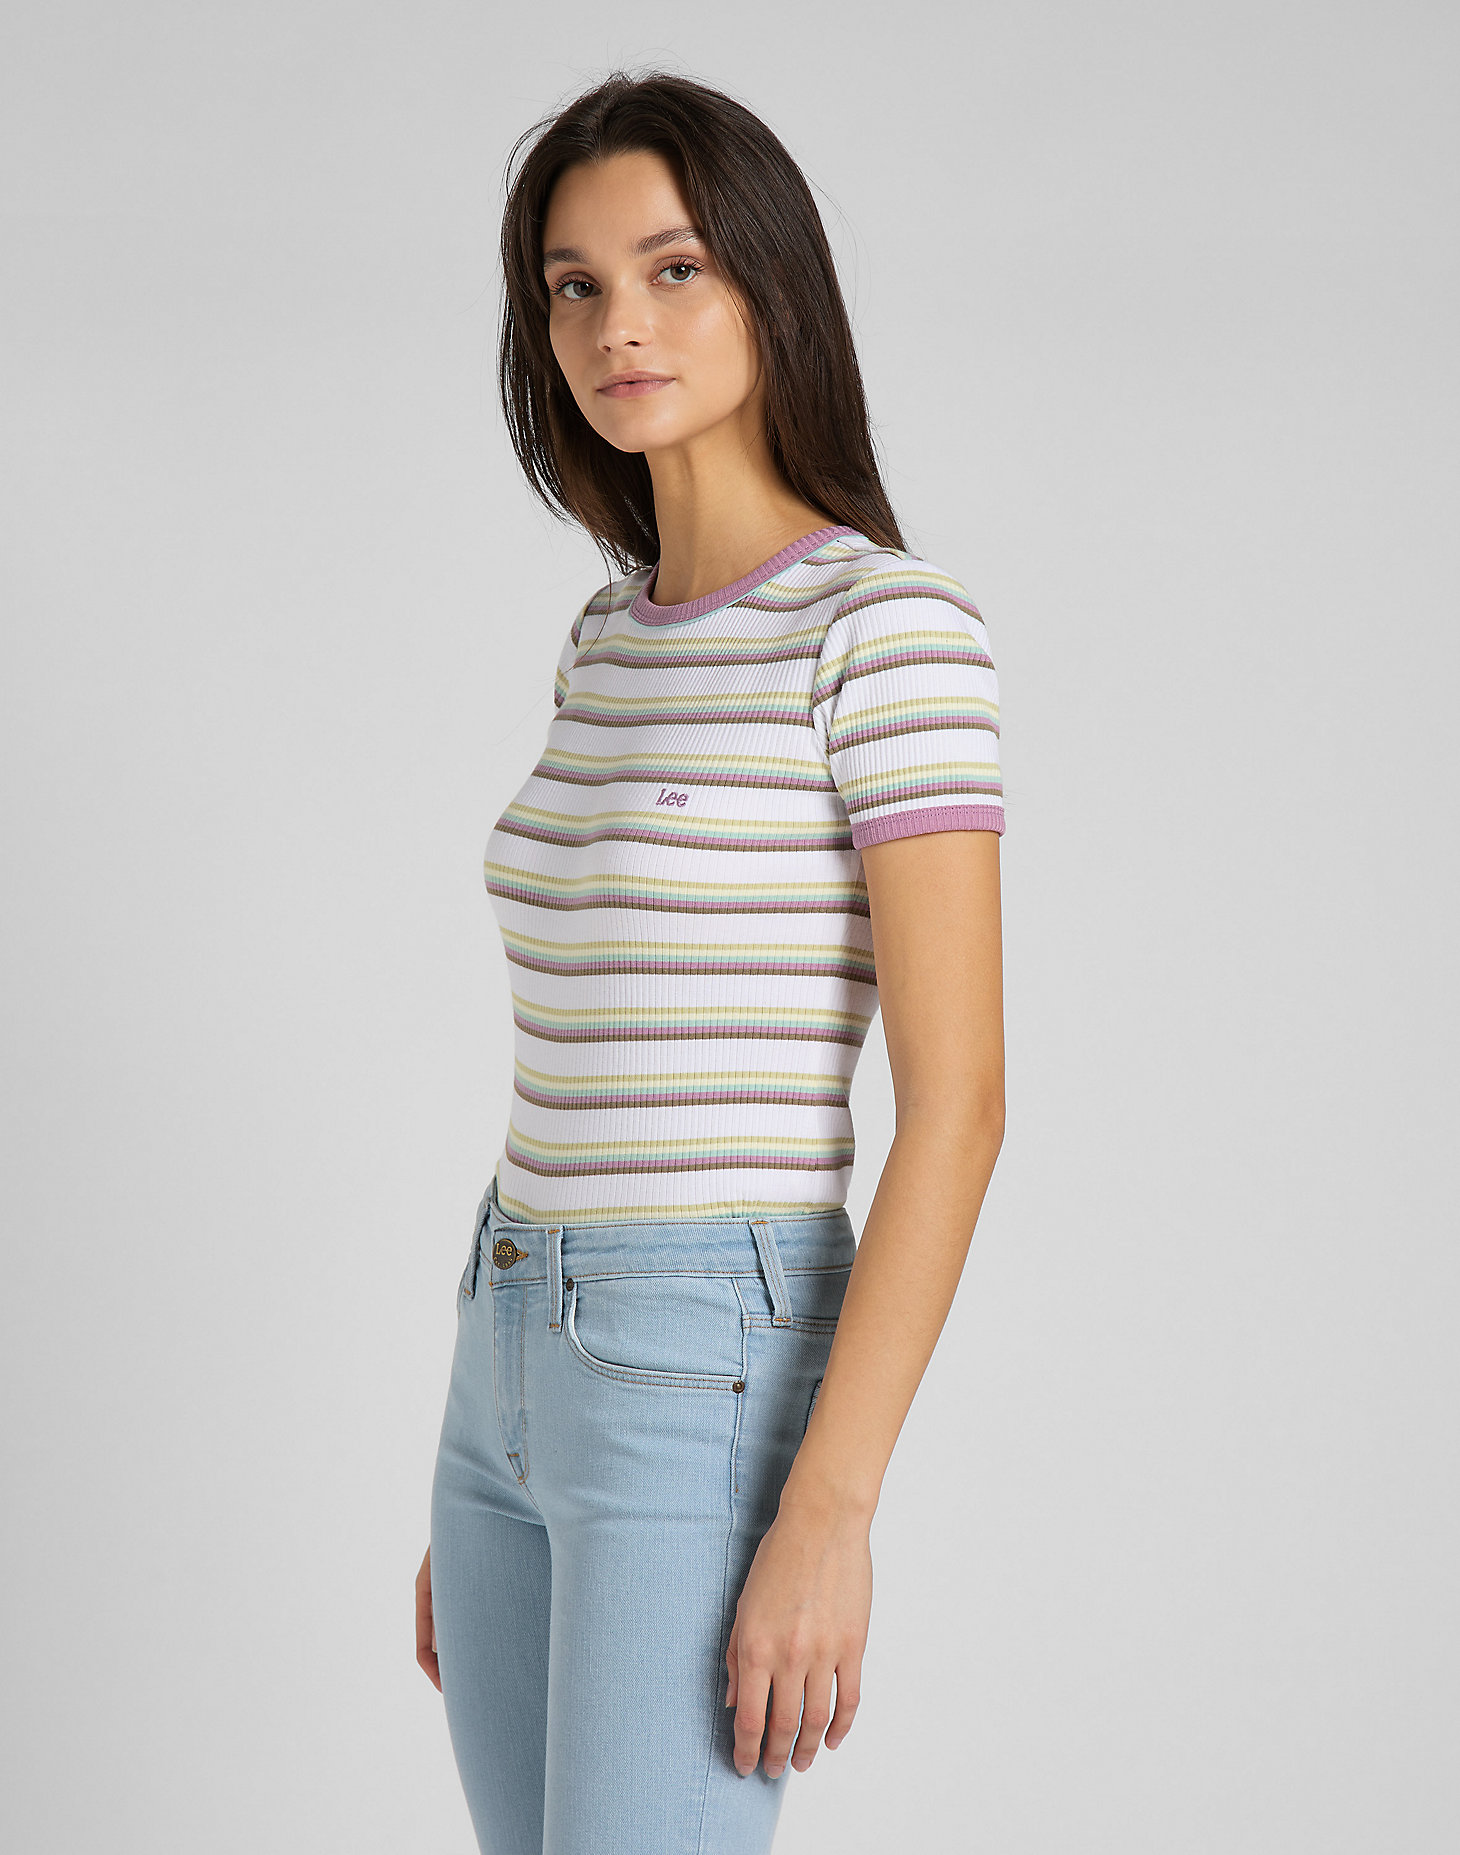 Striped Ribbed Tee in Plum alternative view 3